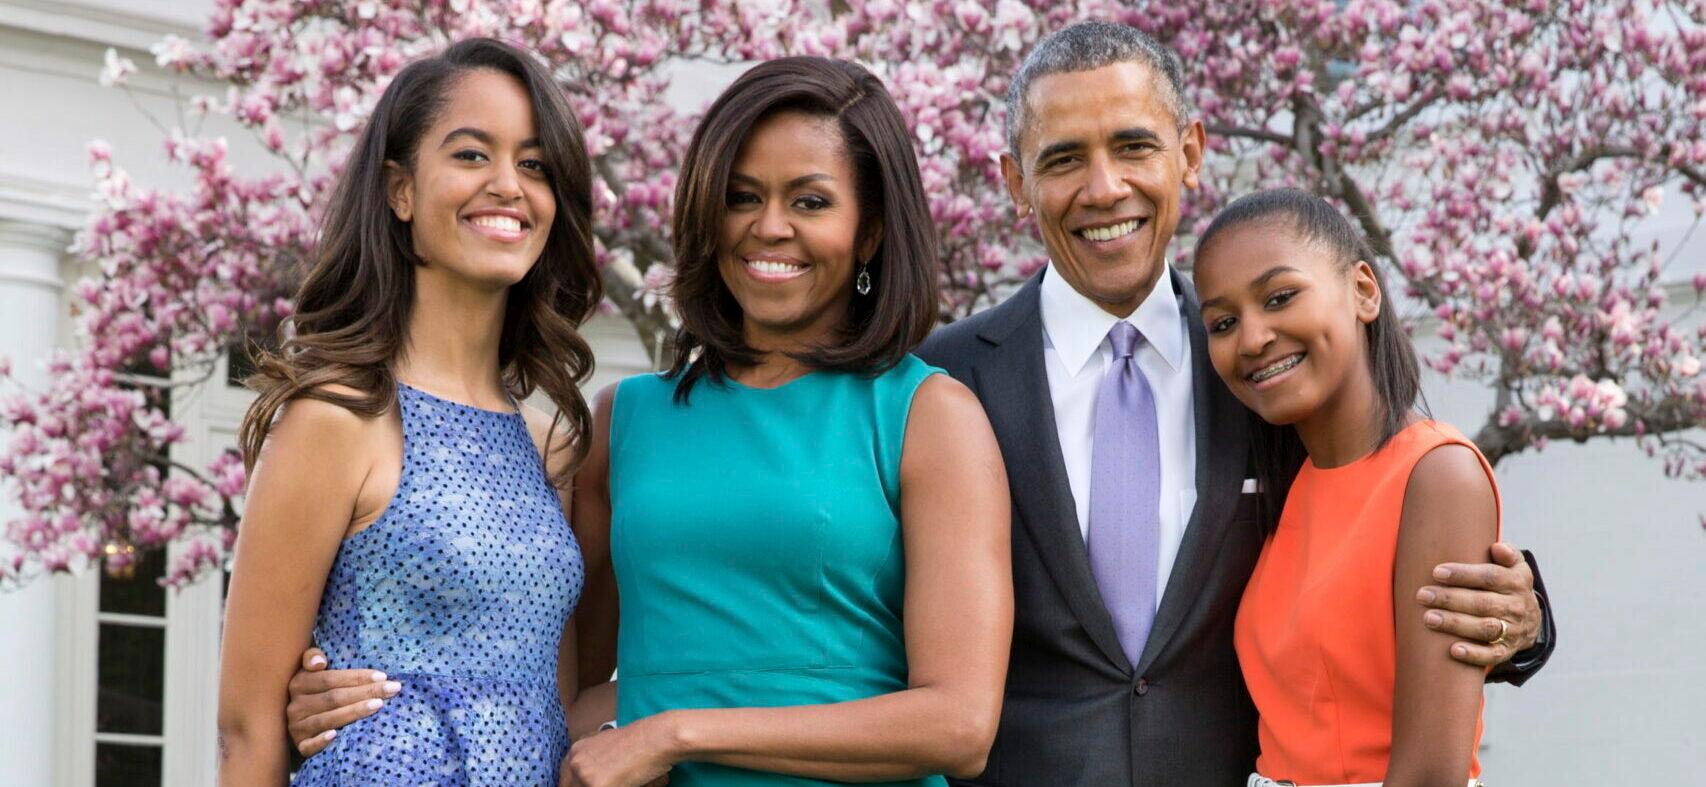 Michelle Obama Praises Daughters Sasha And Malia For Being ‘Supportive’